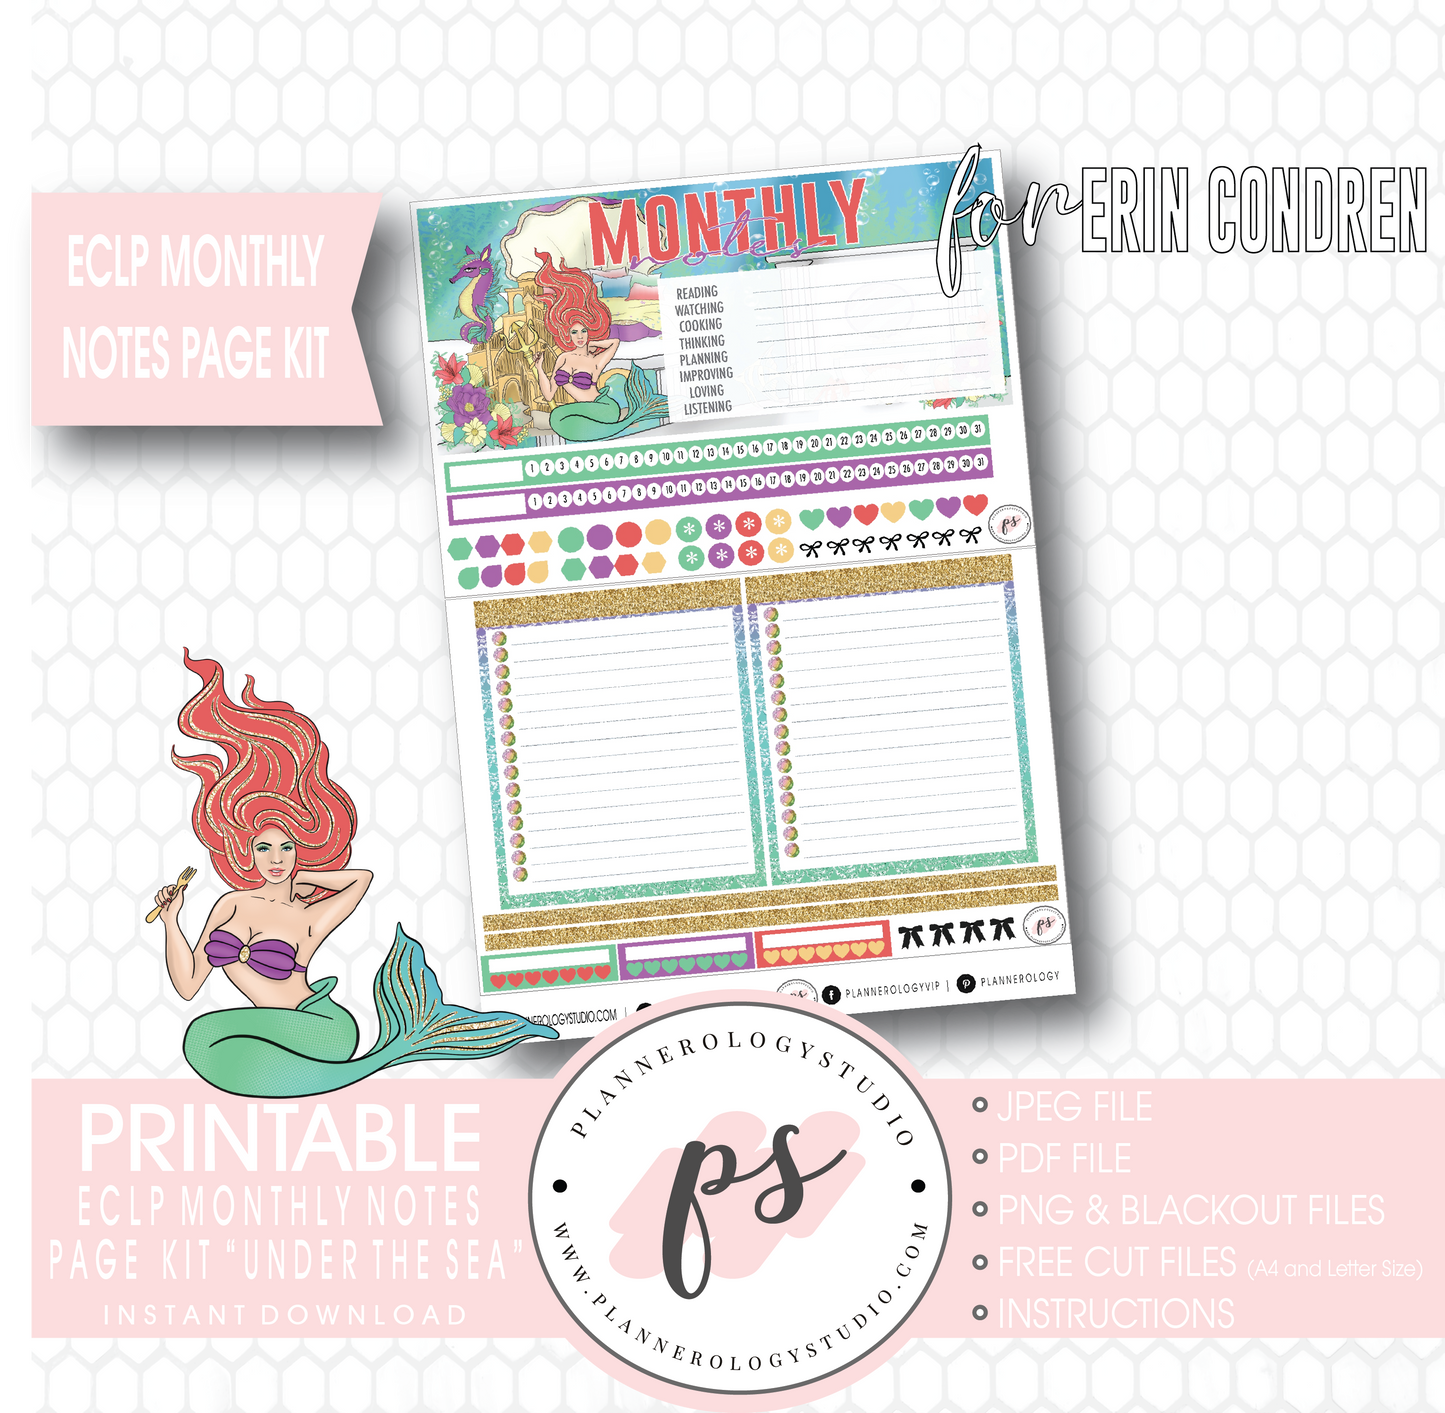 Under the Sea Monthly Notes Page Kit Digital Printable Planner Stickers (for use with Erin Condren) - Plannerologystudio